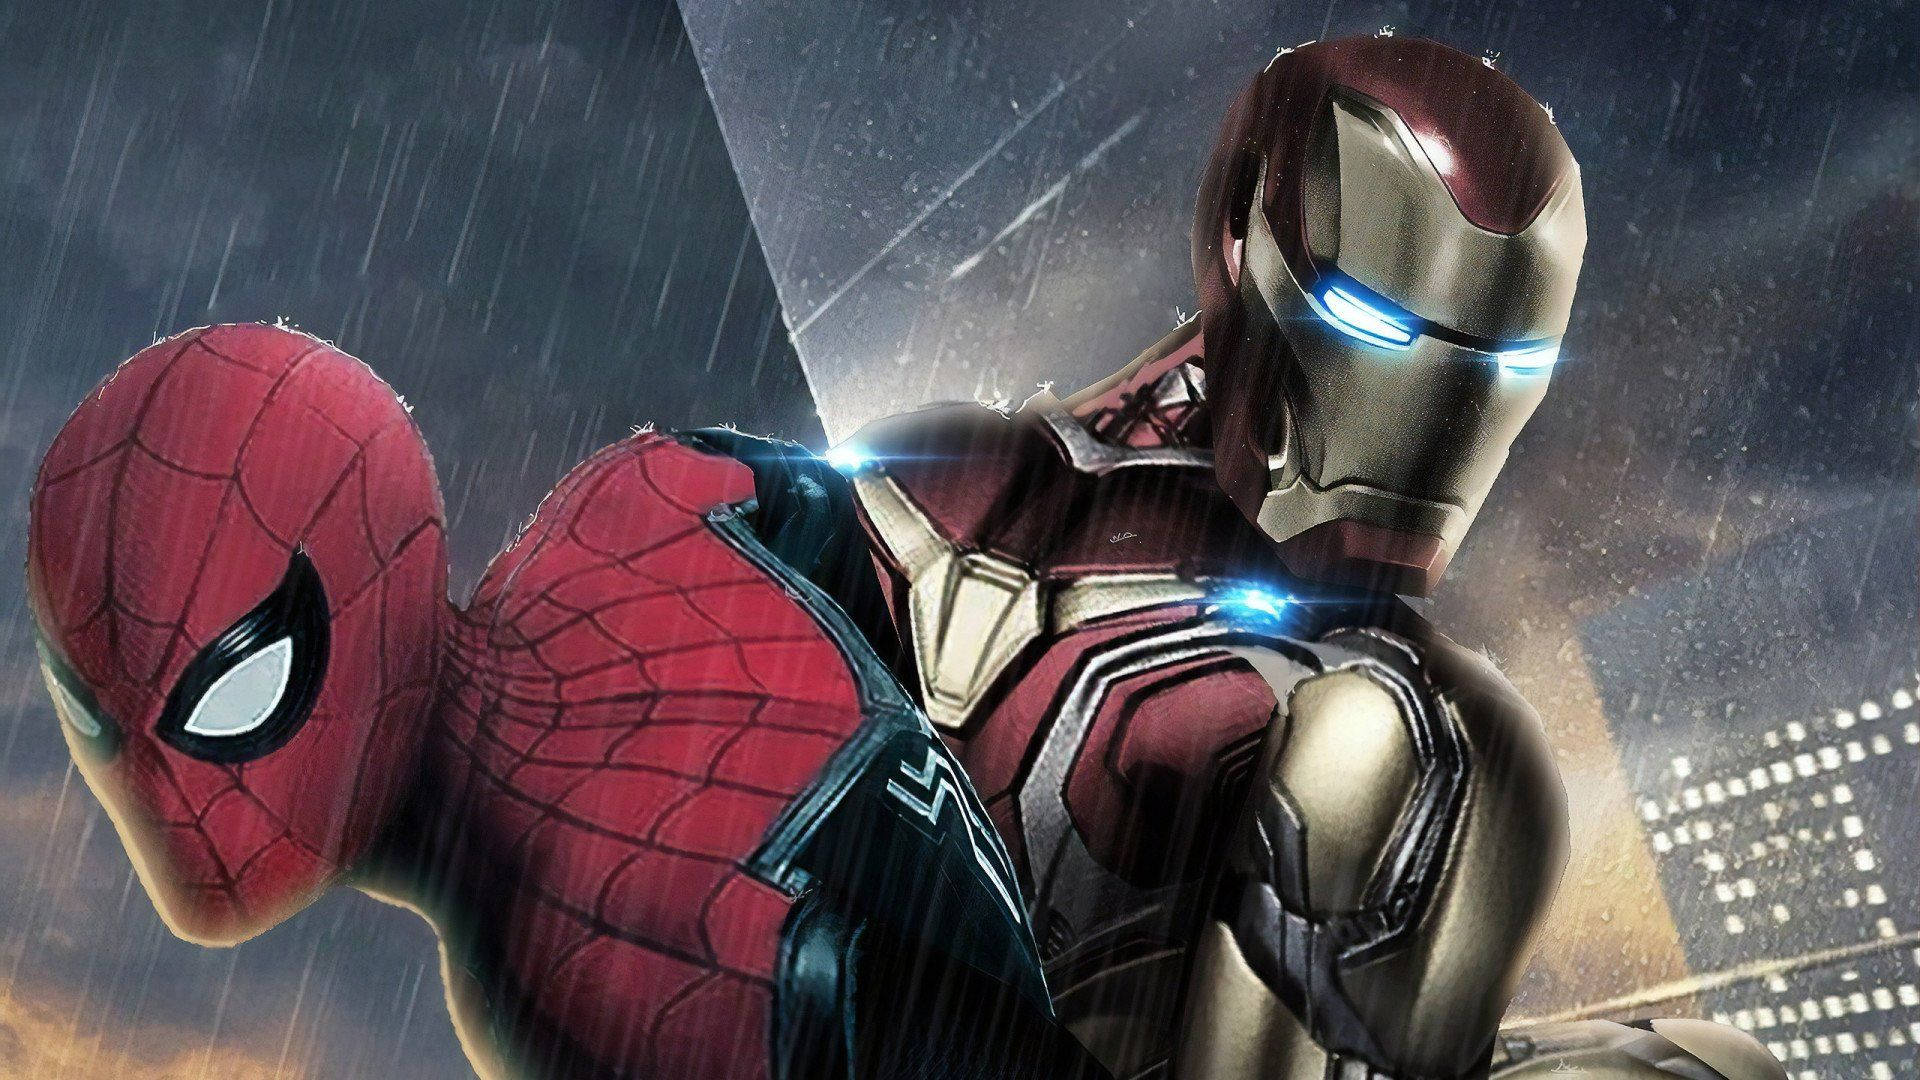 Iron Spiderman And Ironman Collage Wallpaper